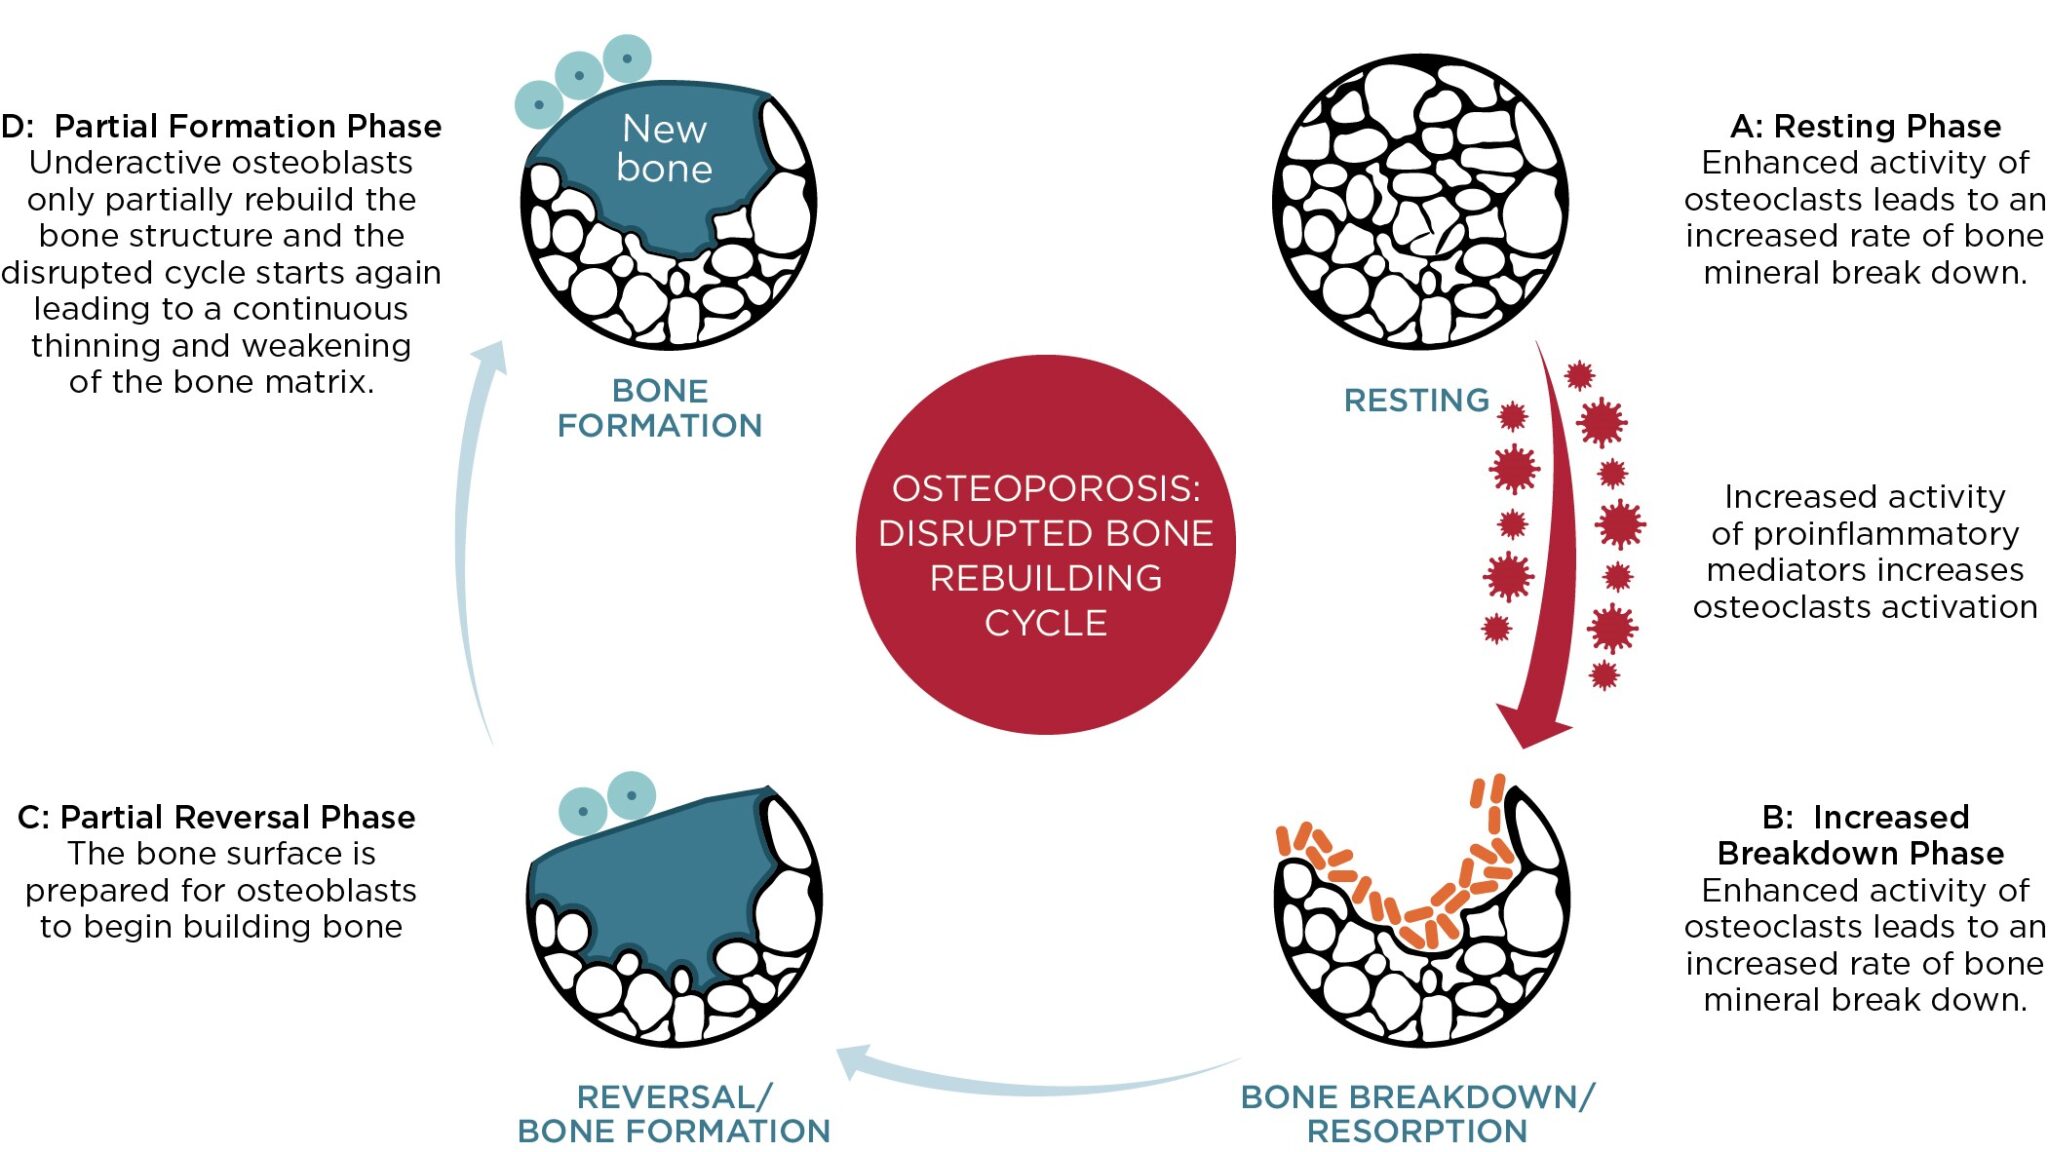 An illustration depicting a disrupted Bone Rebuilding Cycle as a result of Osteoporosis